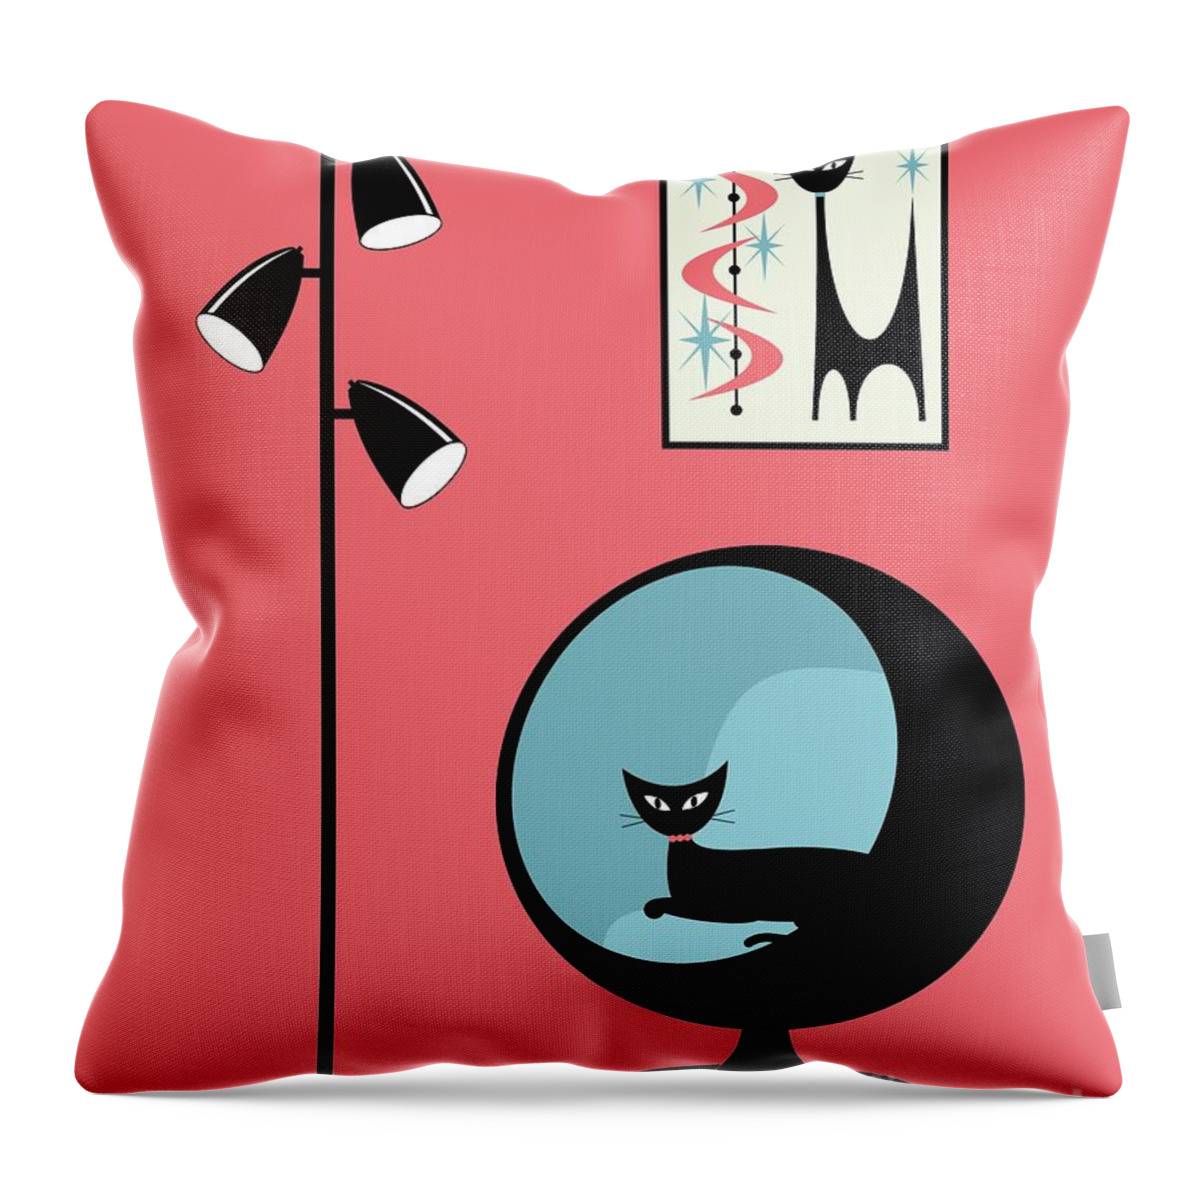 Mid Century Modern Throw Pillow featuring the digital art Mini Atomic Cat on Pink by Donna Mibus